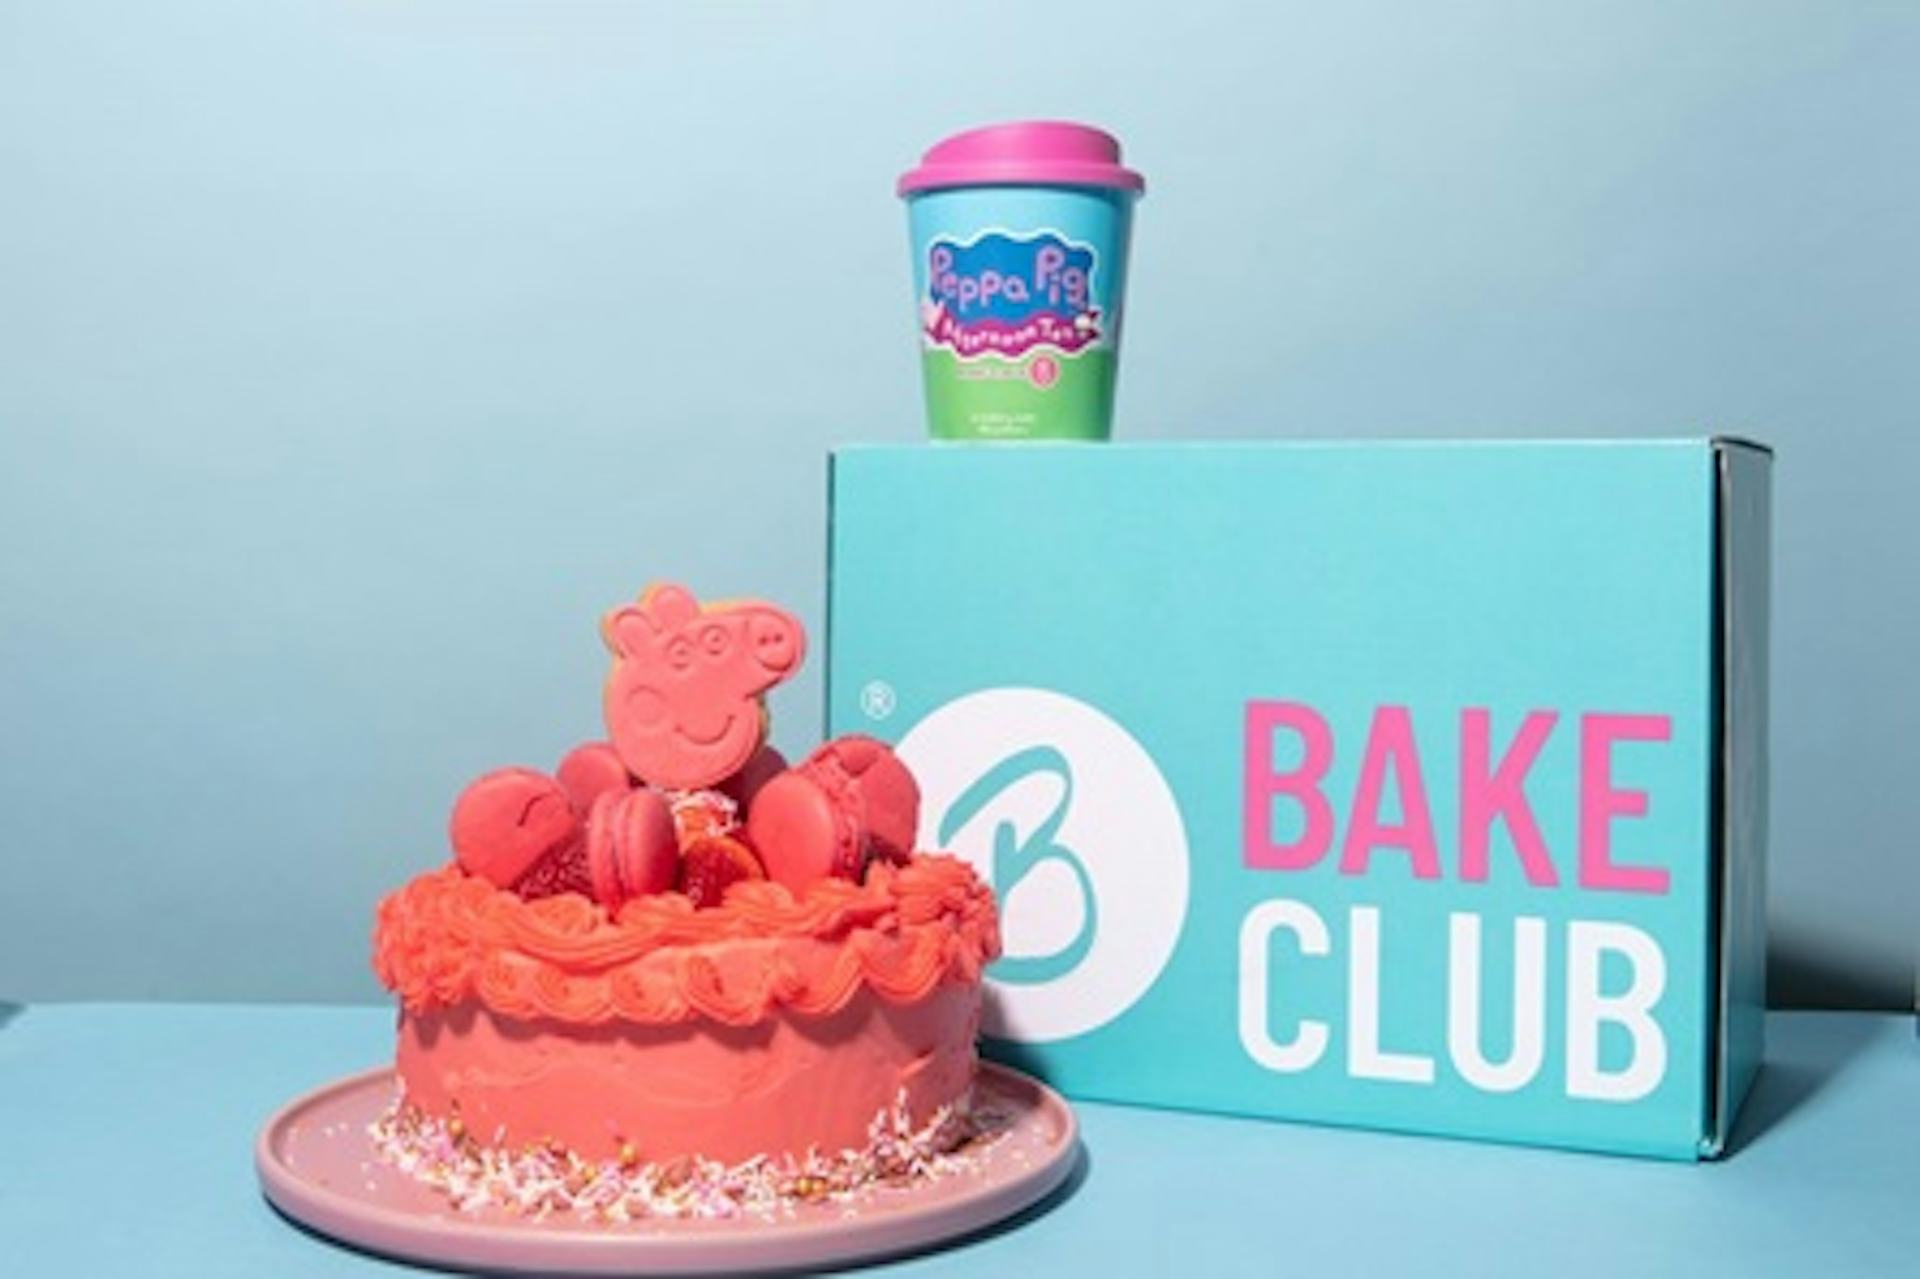 Home Baking Box and Online Tutorial from The Bake Club